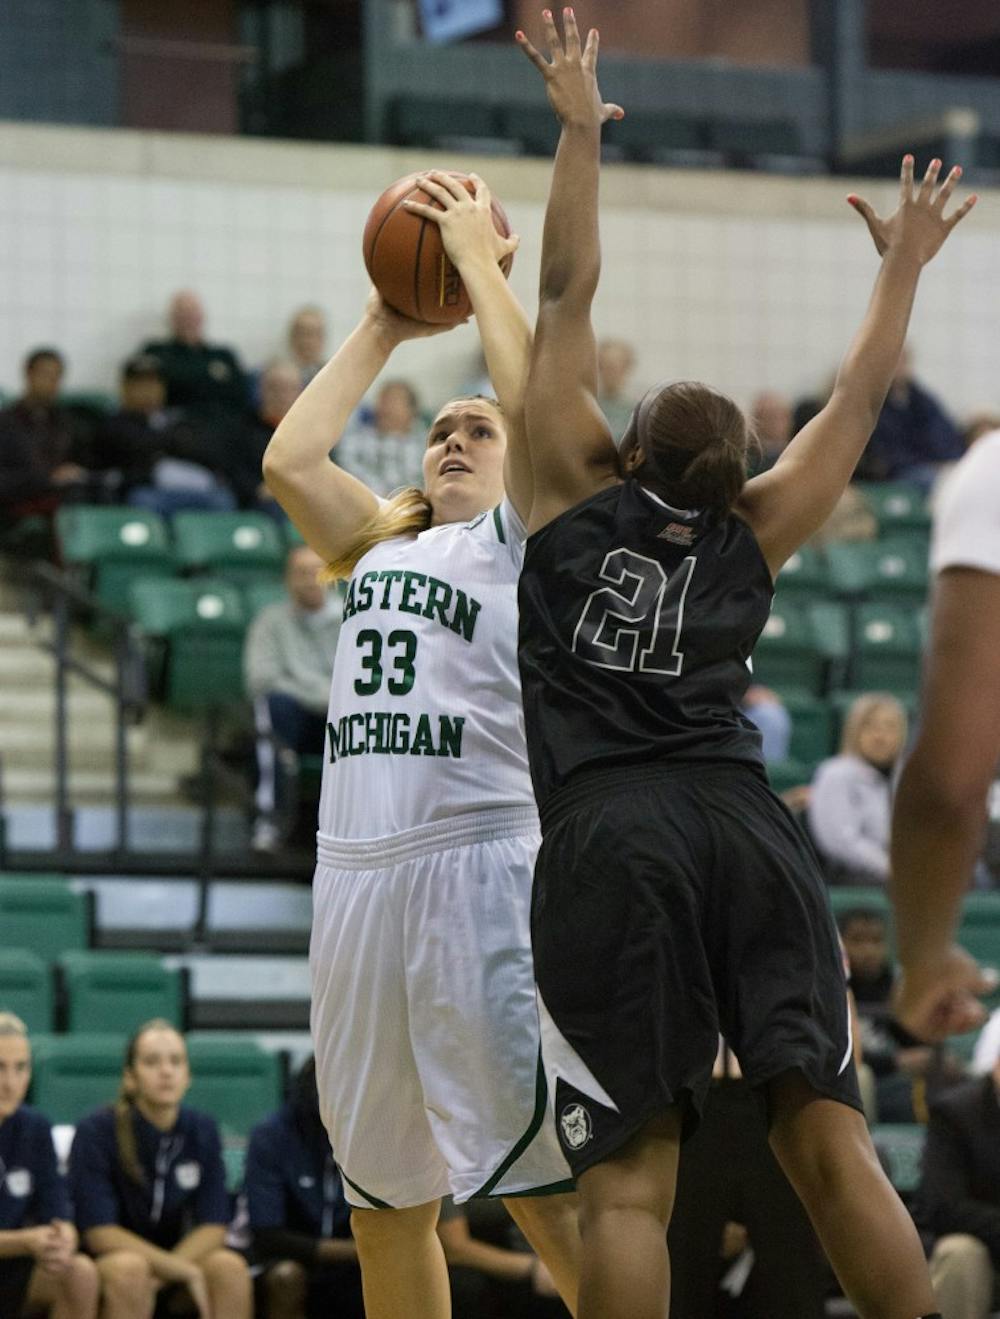 EMU women move to 3-0 with a 84-70 win over Cleveland State